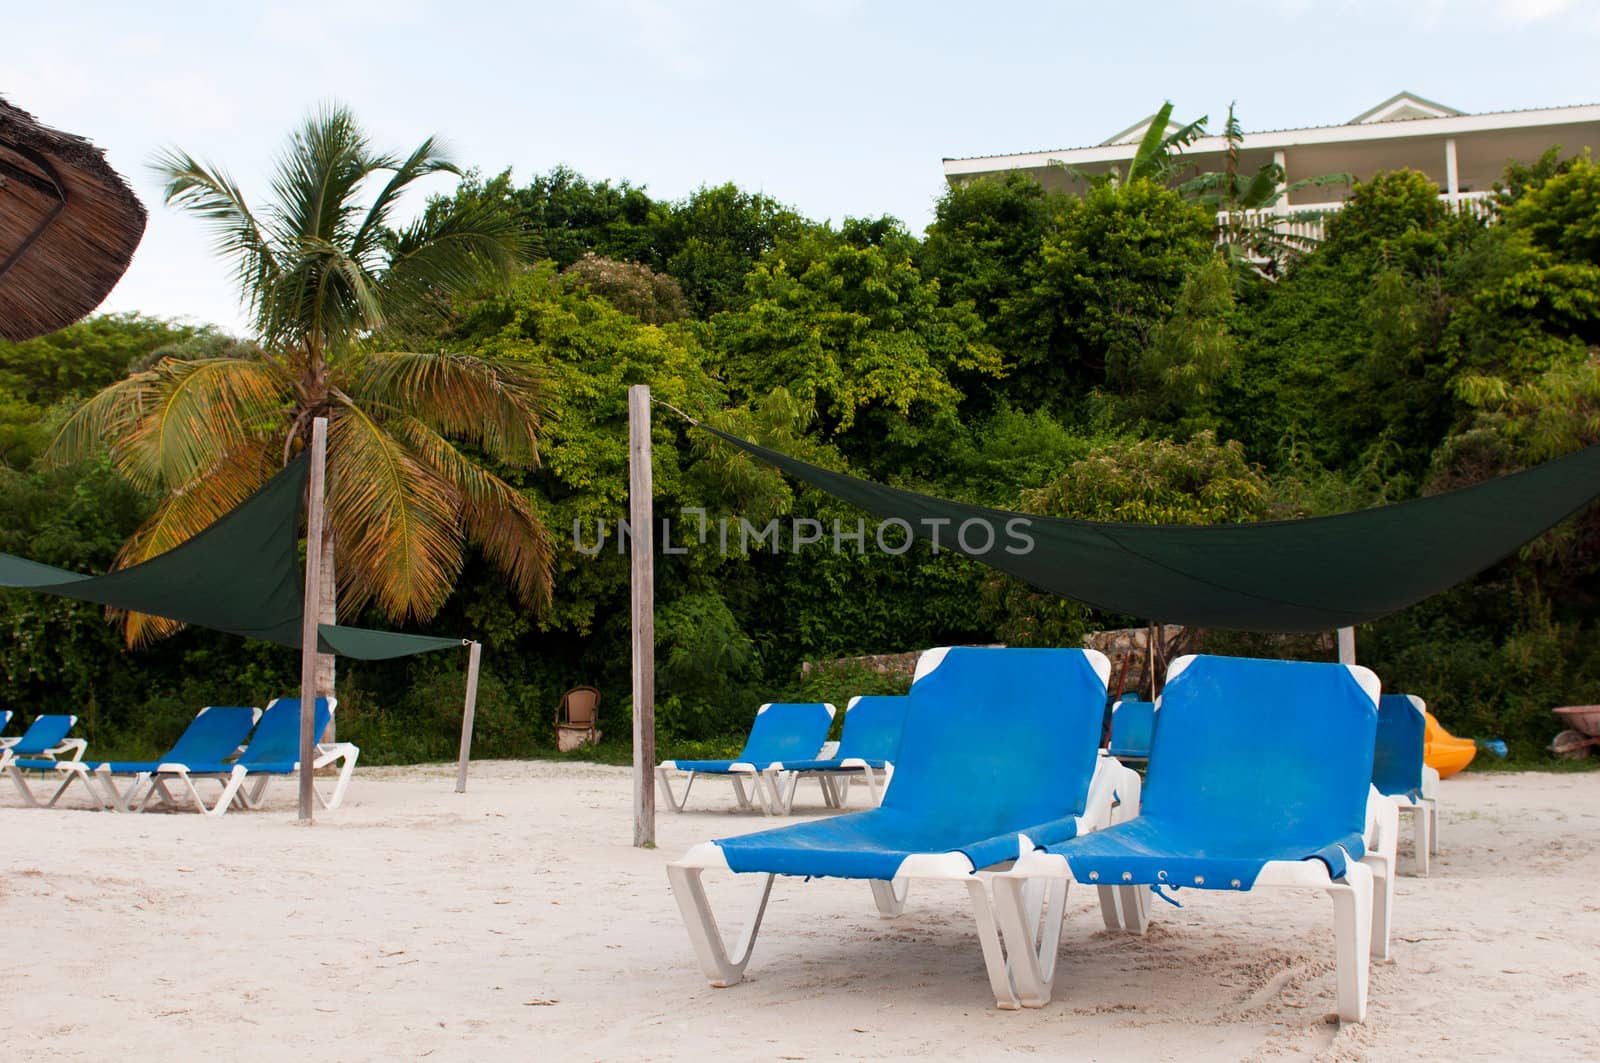 beach chairs on a tropical beach resort in Antigua (sunset picture)